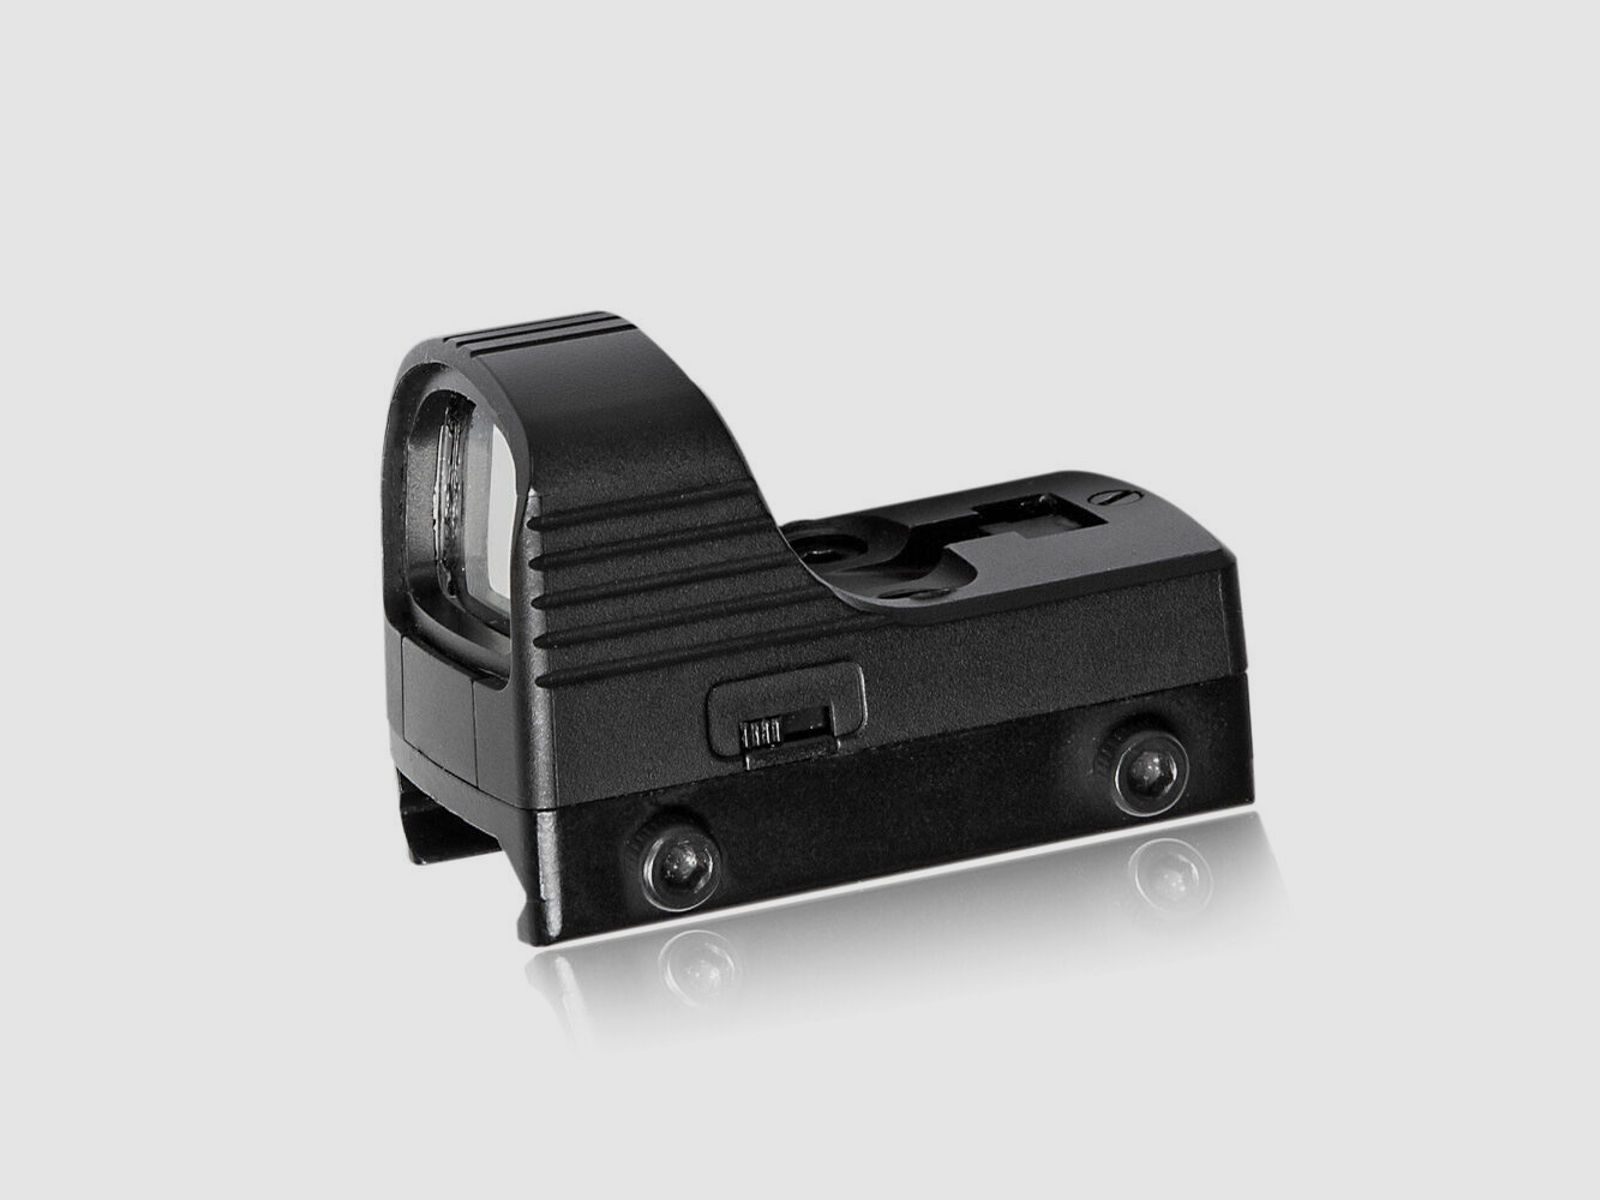 ASG Micro Red Dot Sight Rotpunktvisier mit Montage